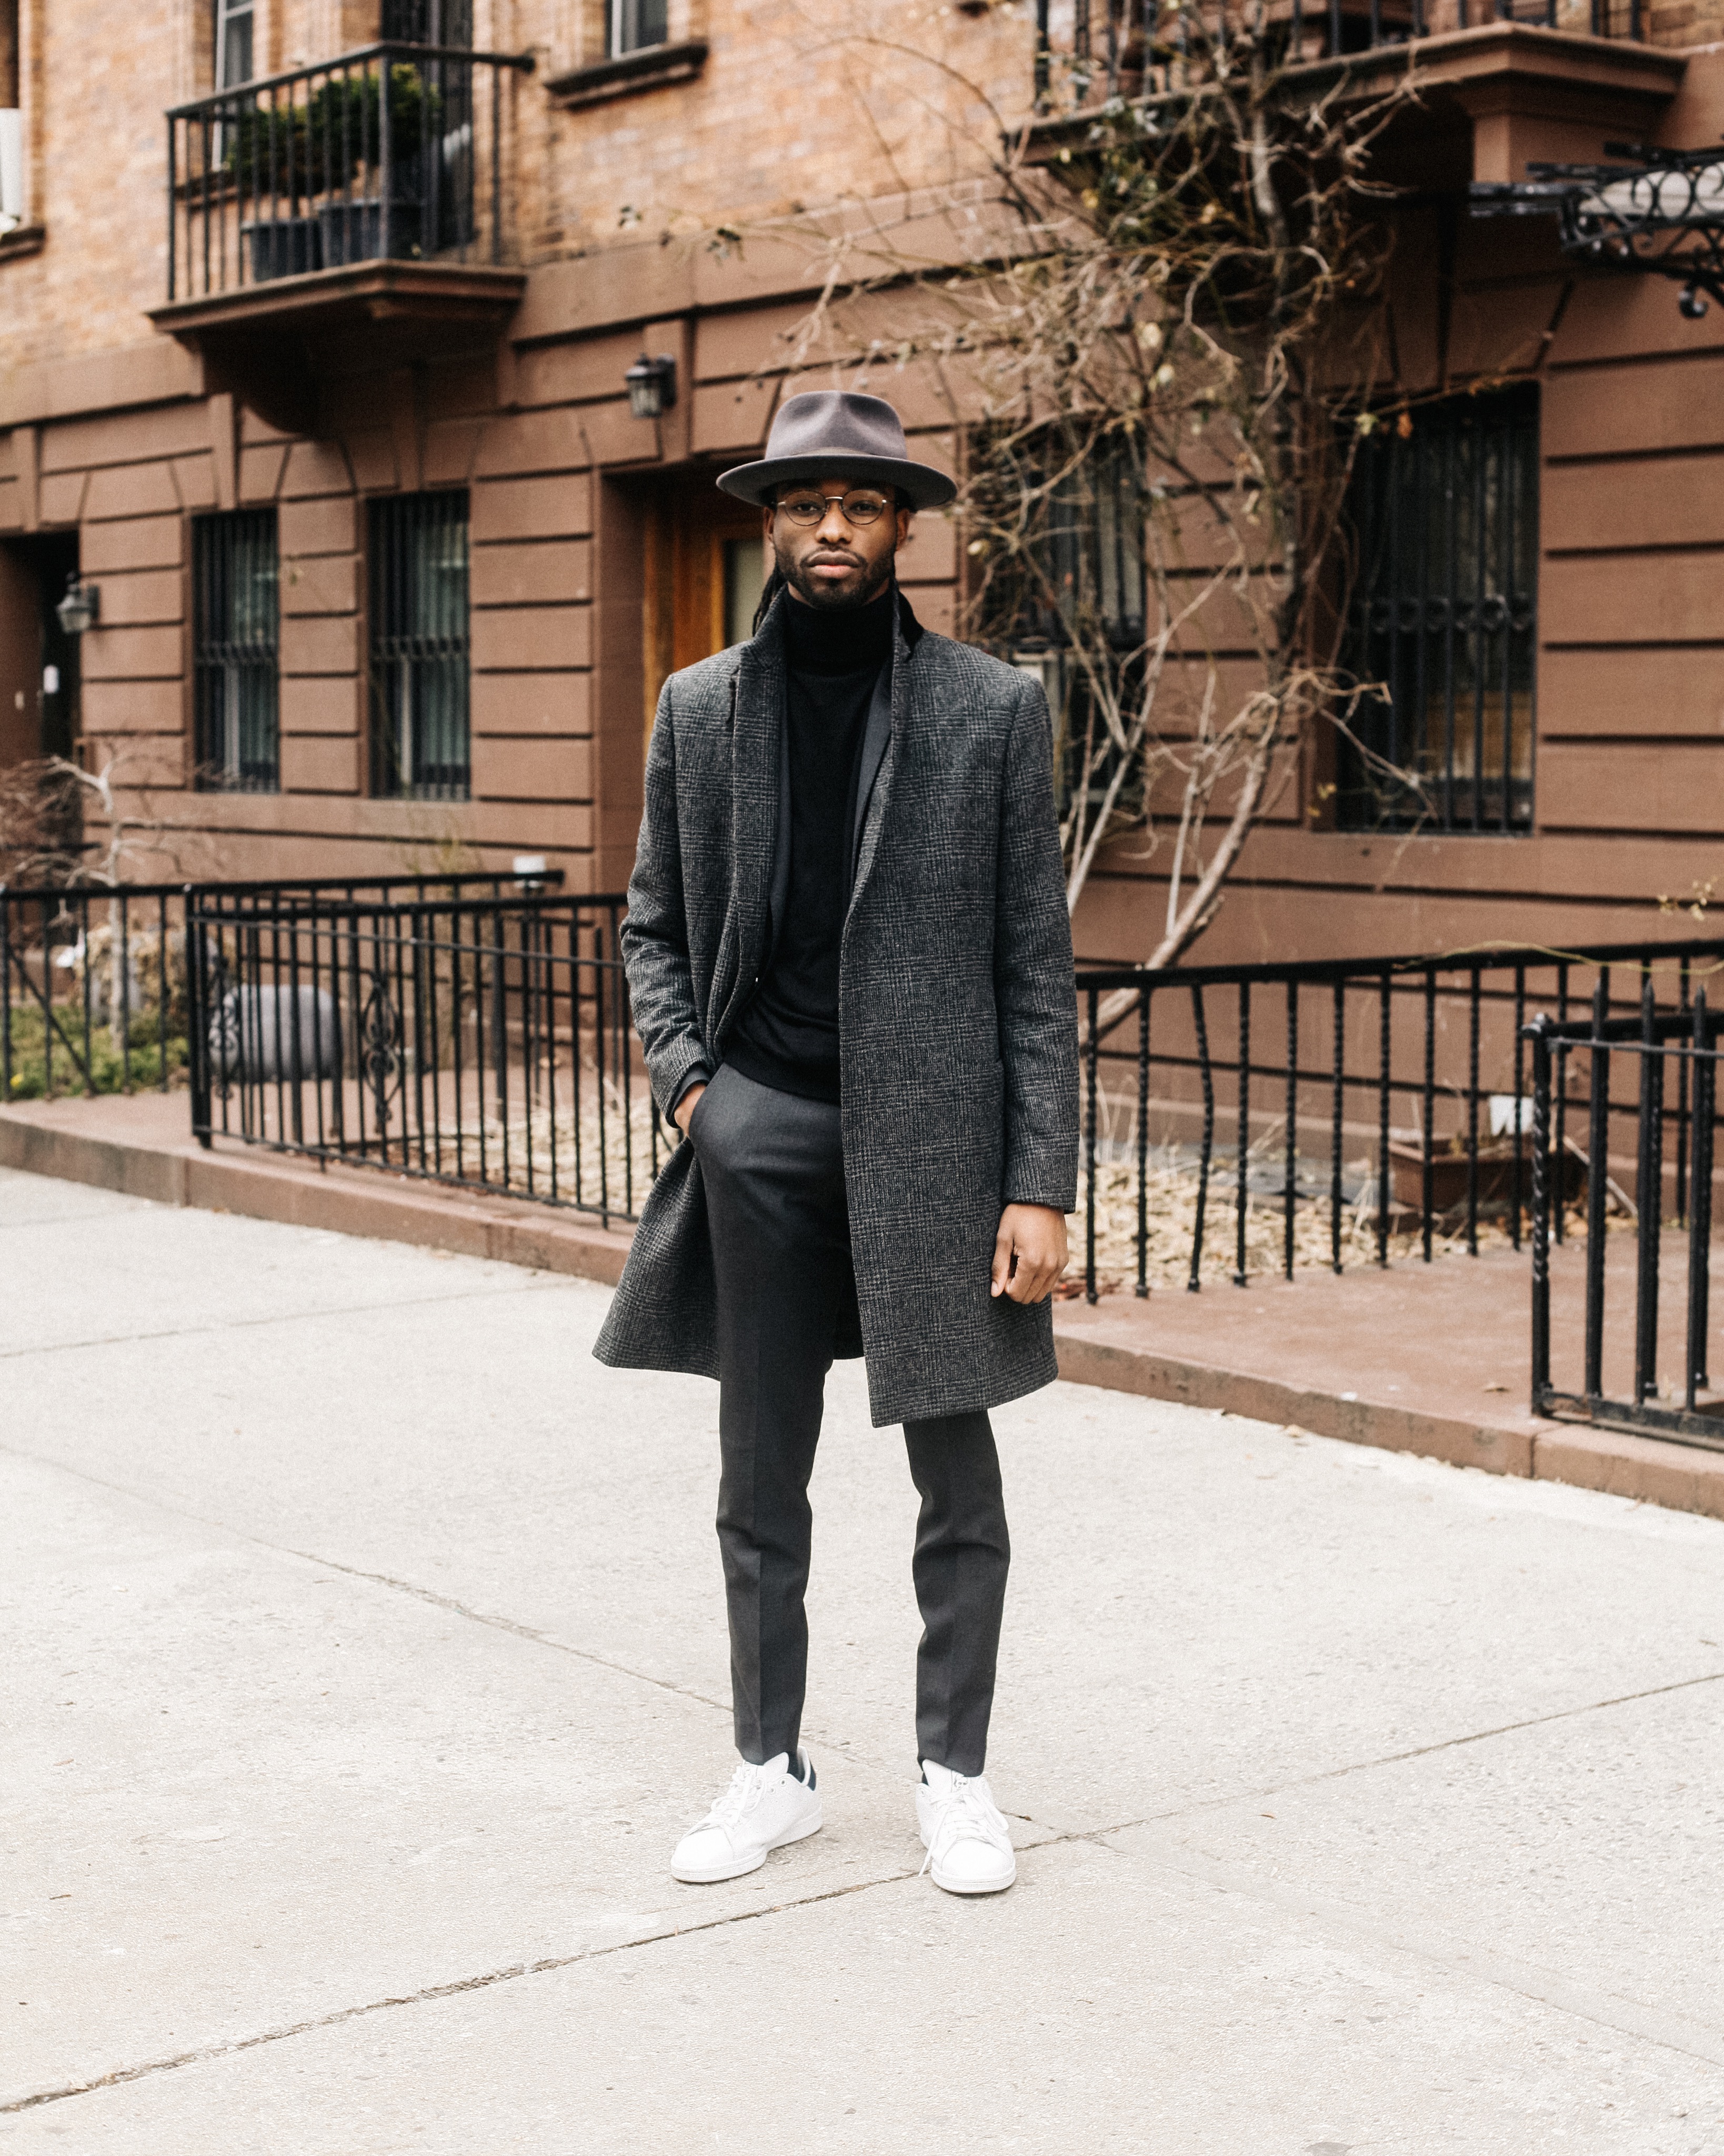 Fashion Bomber of the Day: Arie from Harlem – Fashion Bomb Daily